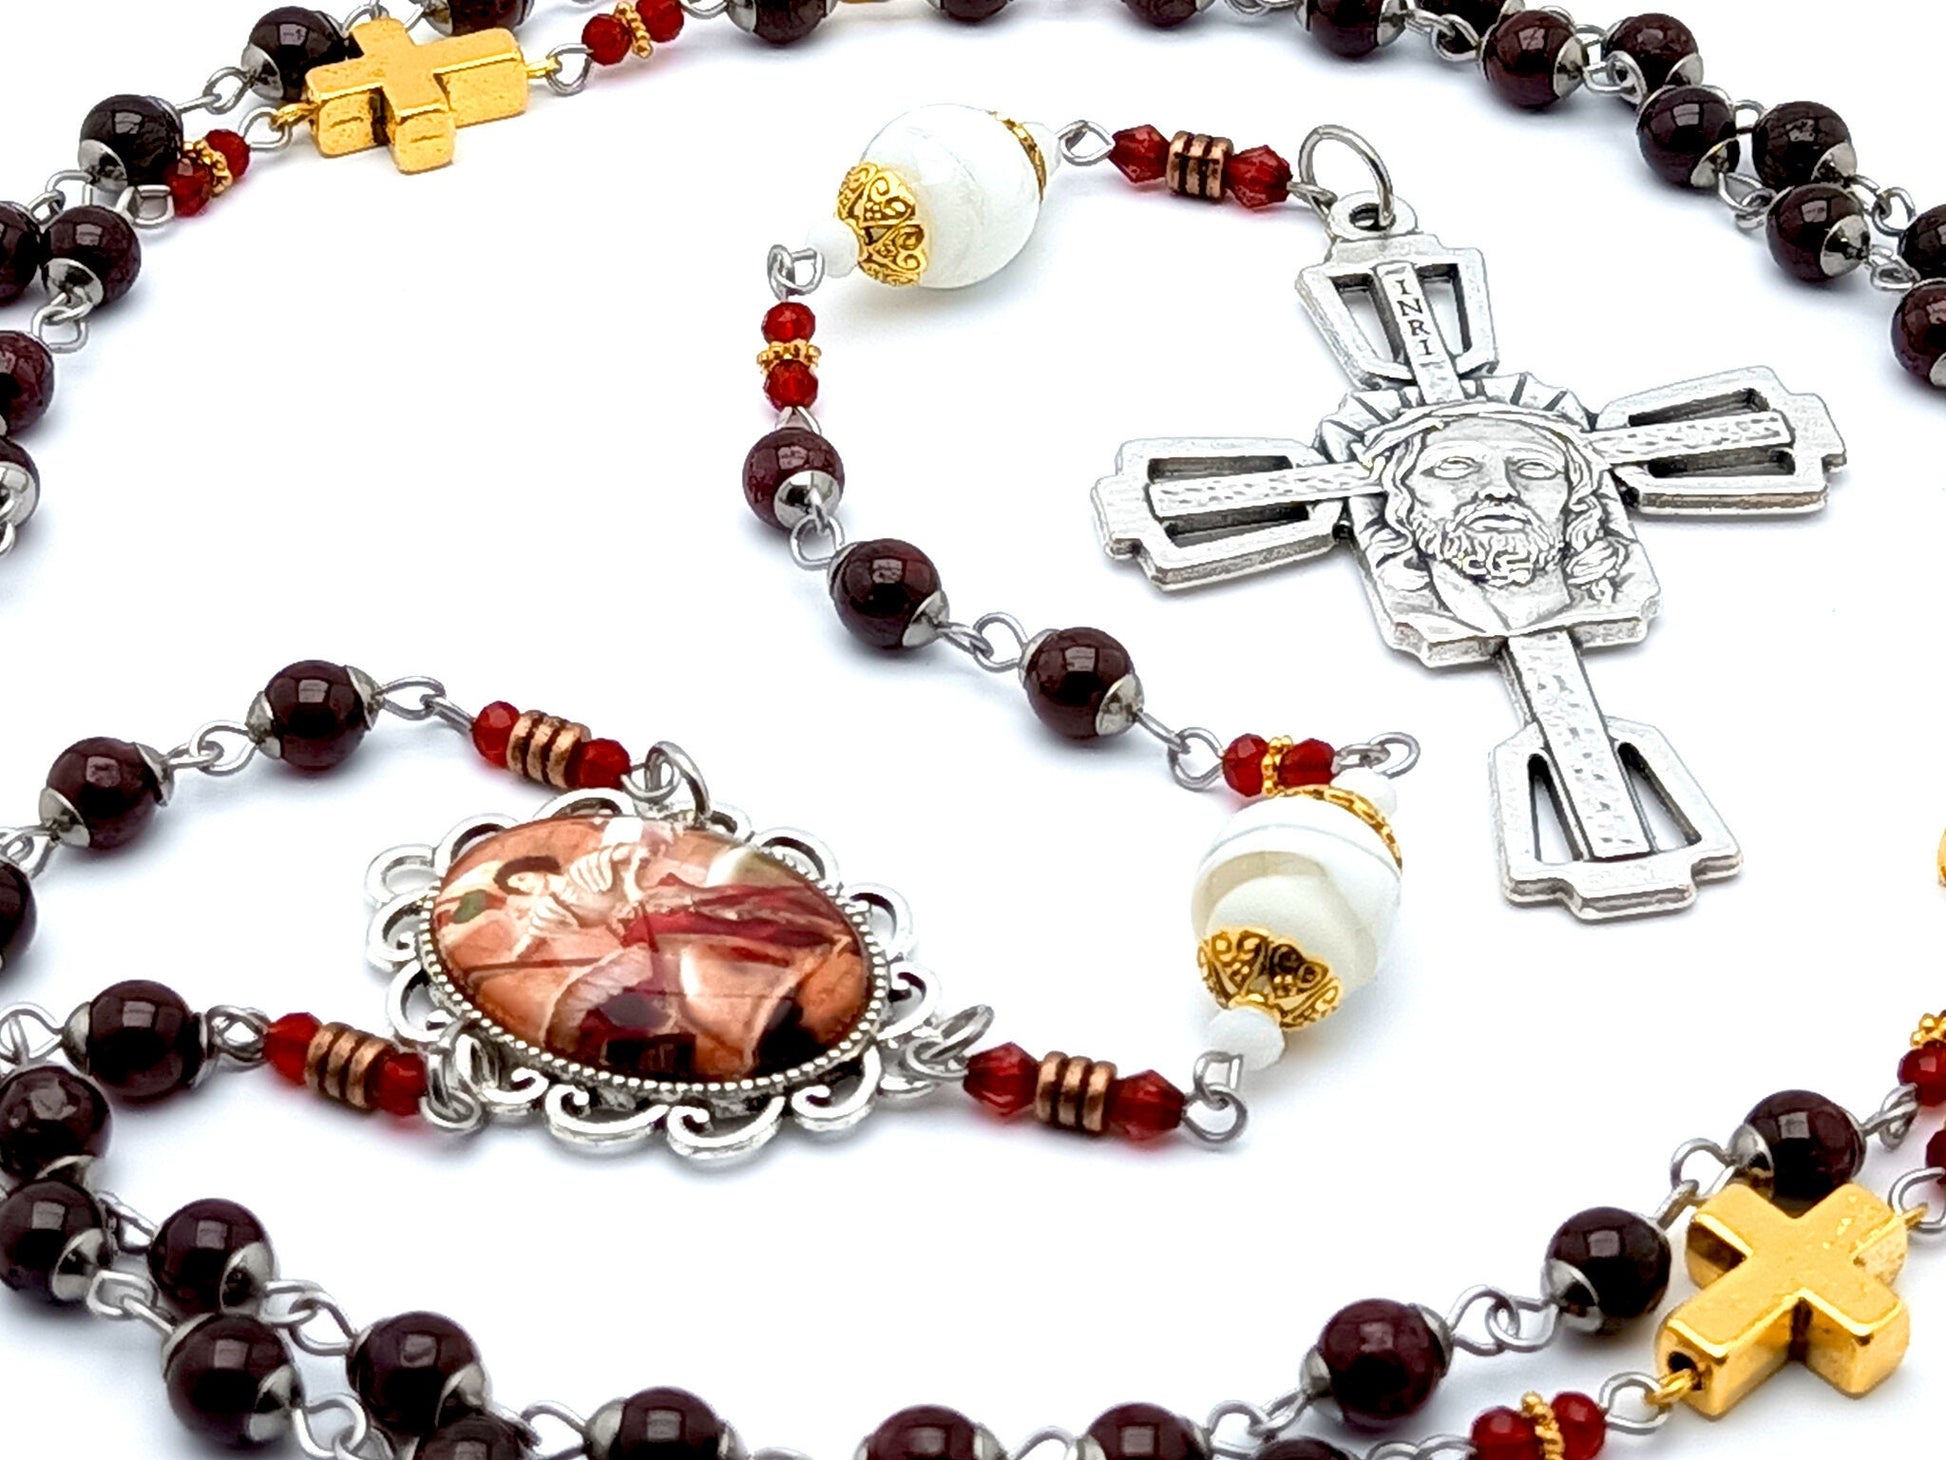 Saint Joan of Arc unique rosary beads with garnet gemstone, blown glass bead and gold linking cross beads and Crowning of Thorns crucifix.